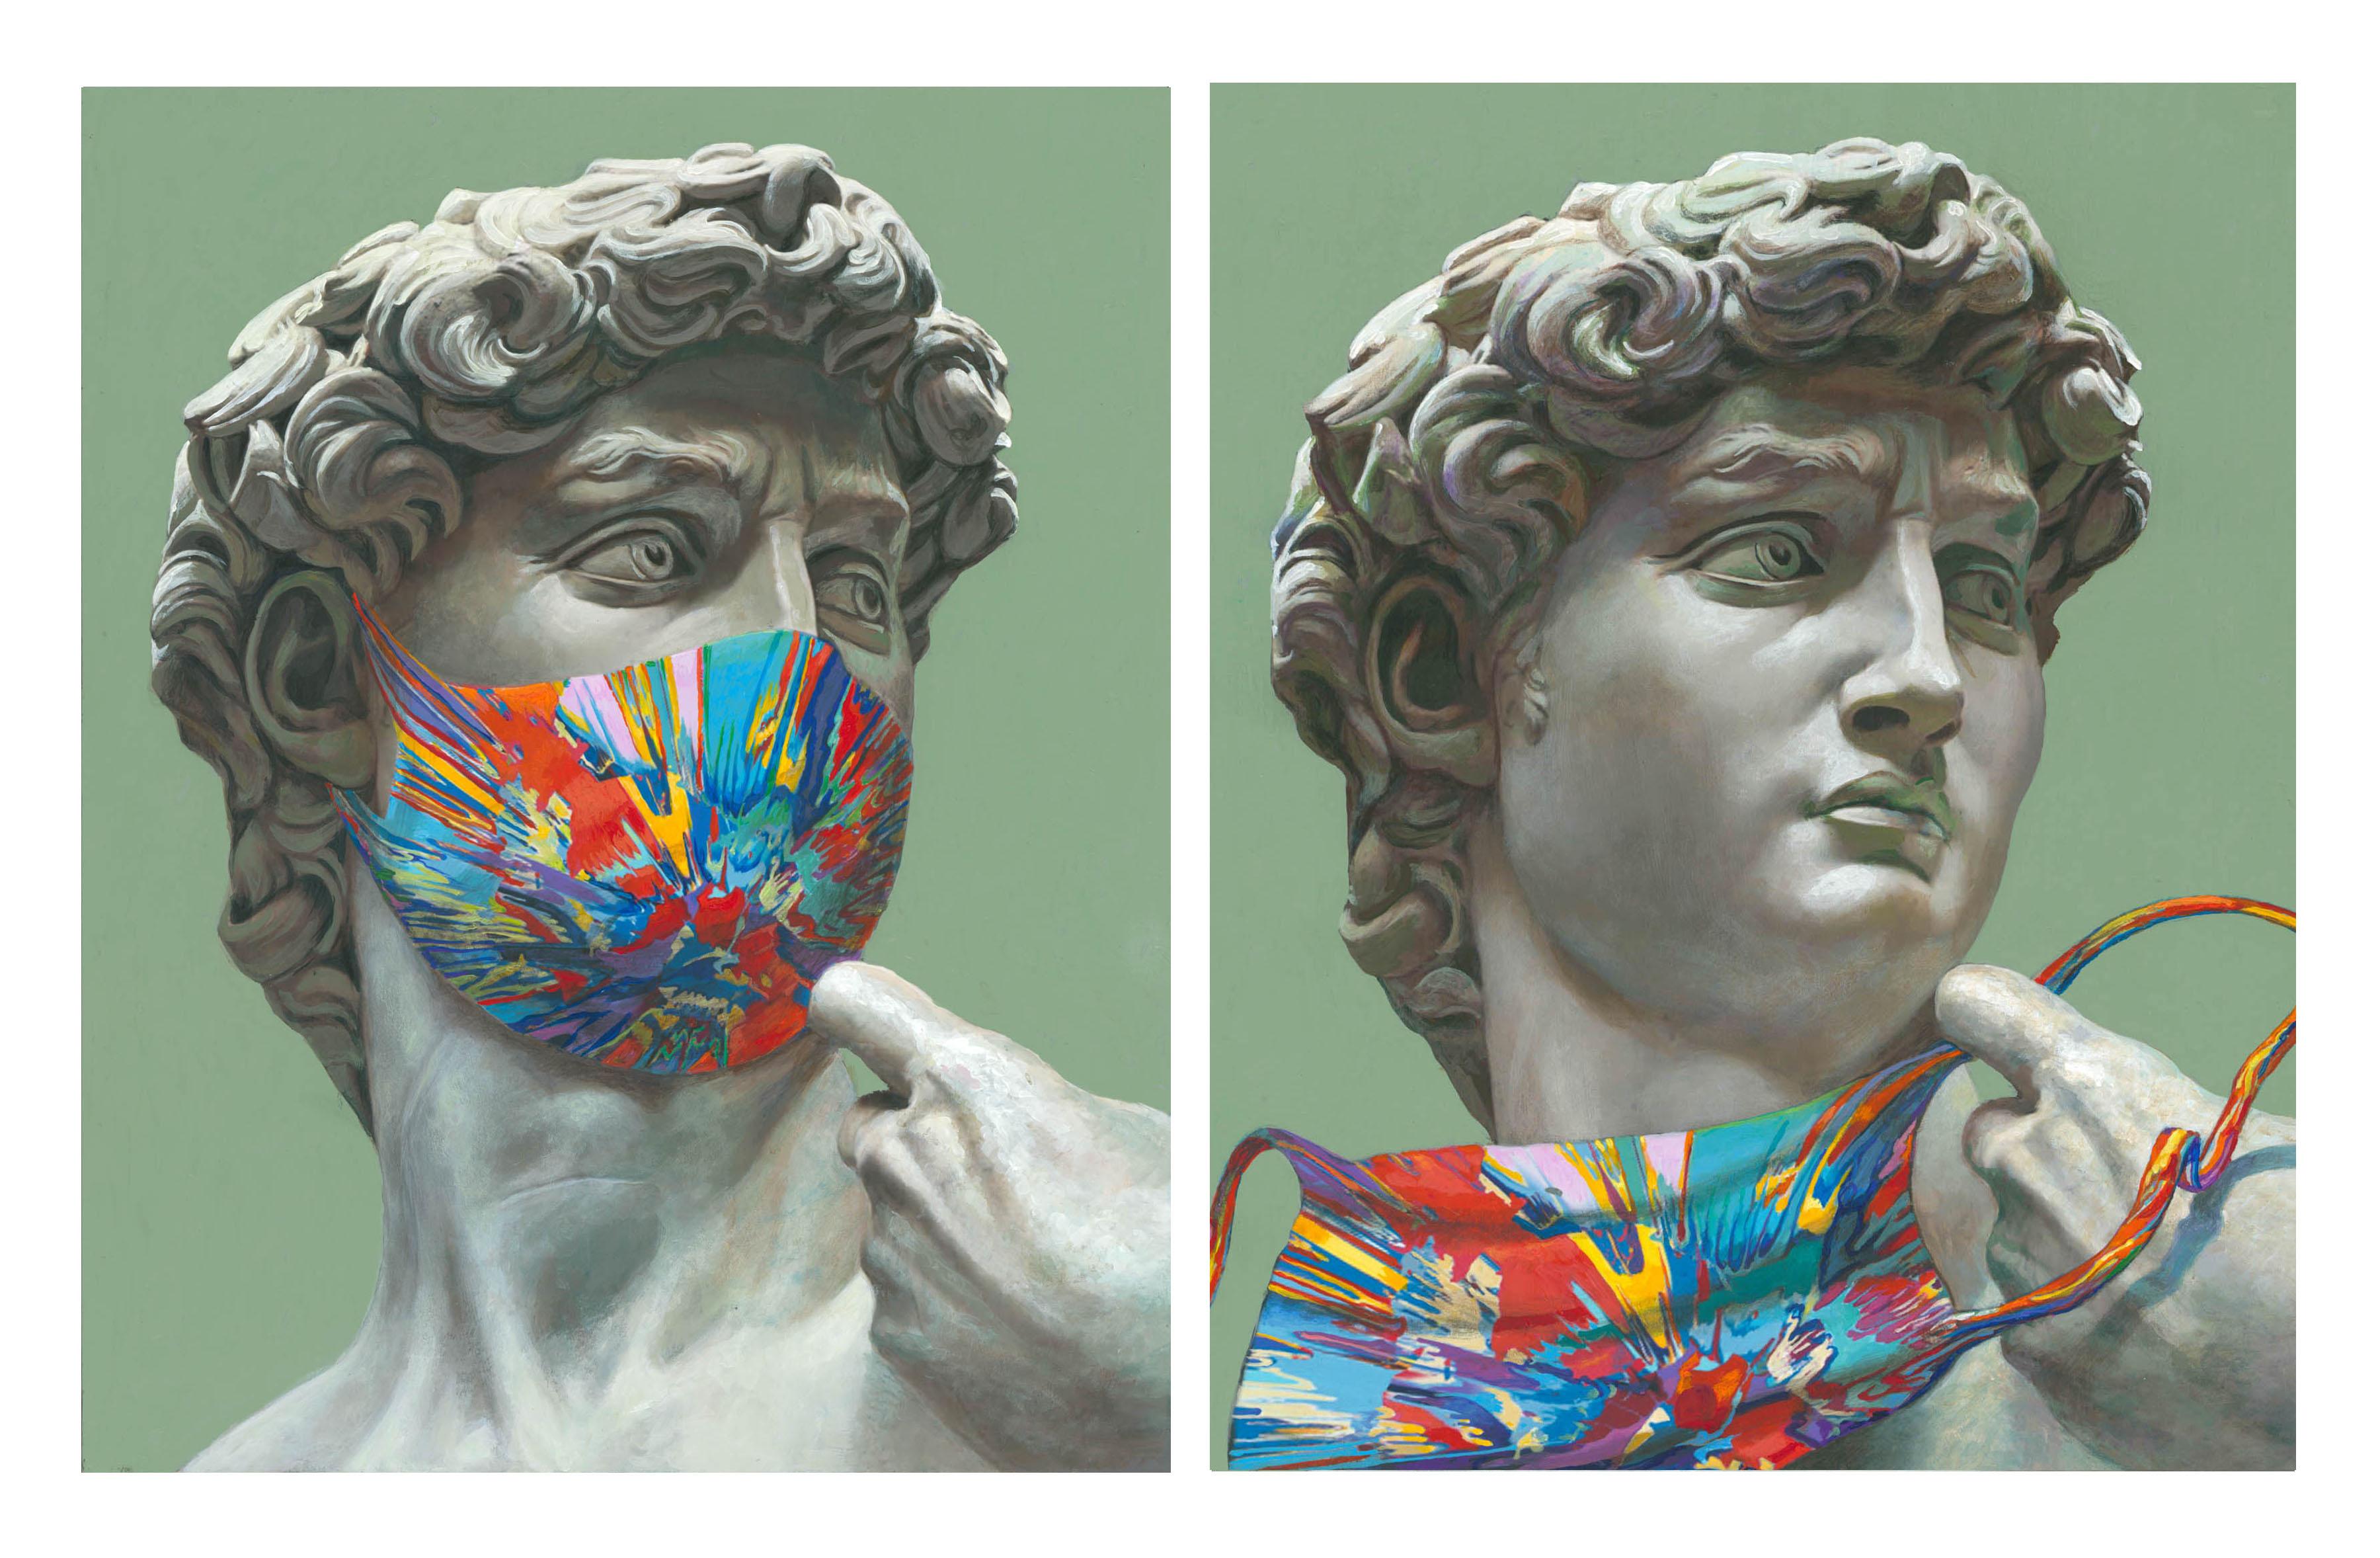 Clement Kamena - Michelangelo “David” with Damien Hirst's mask and Unmasked  For Sale at 1stDibs | michelangelo no mask, michelangelo david painting,  david mask